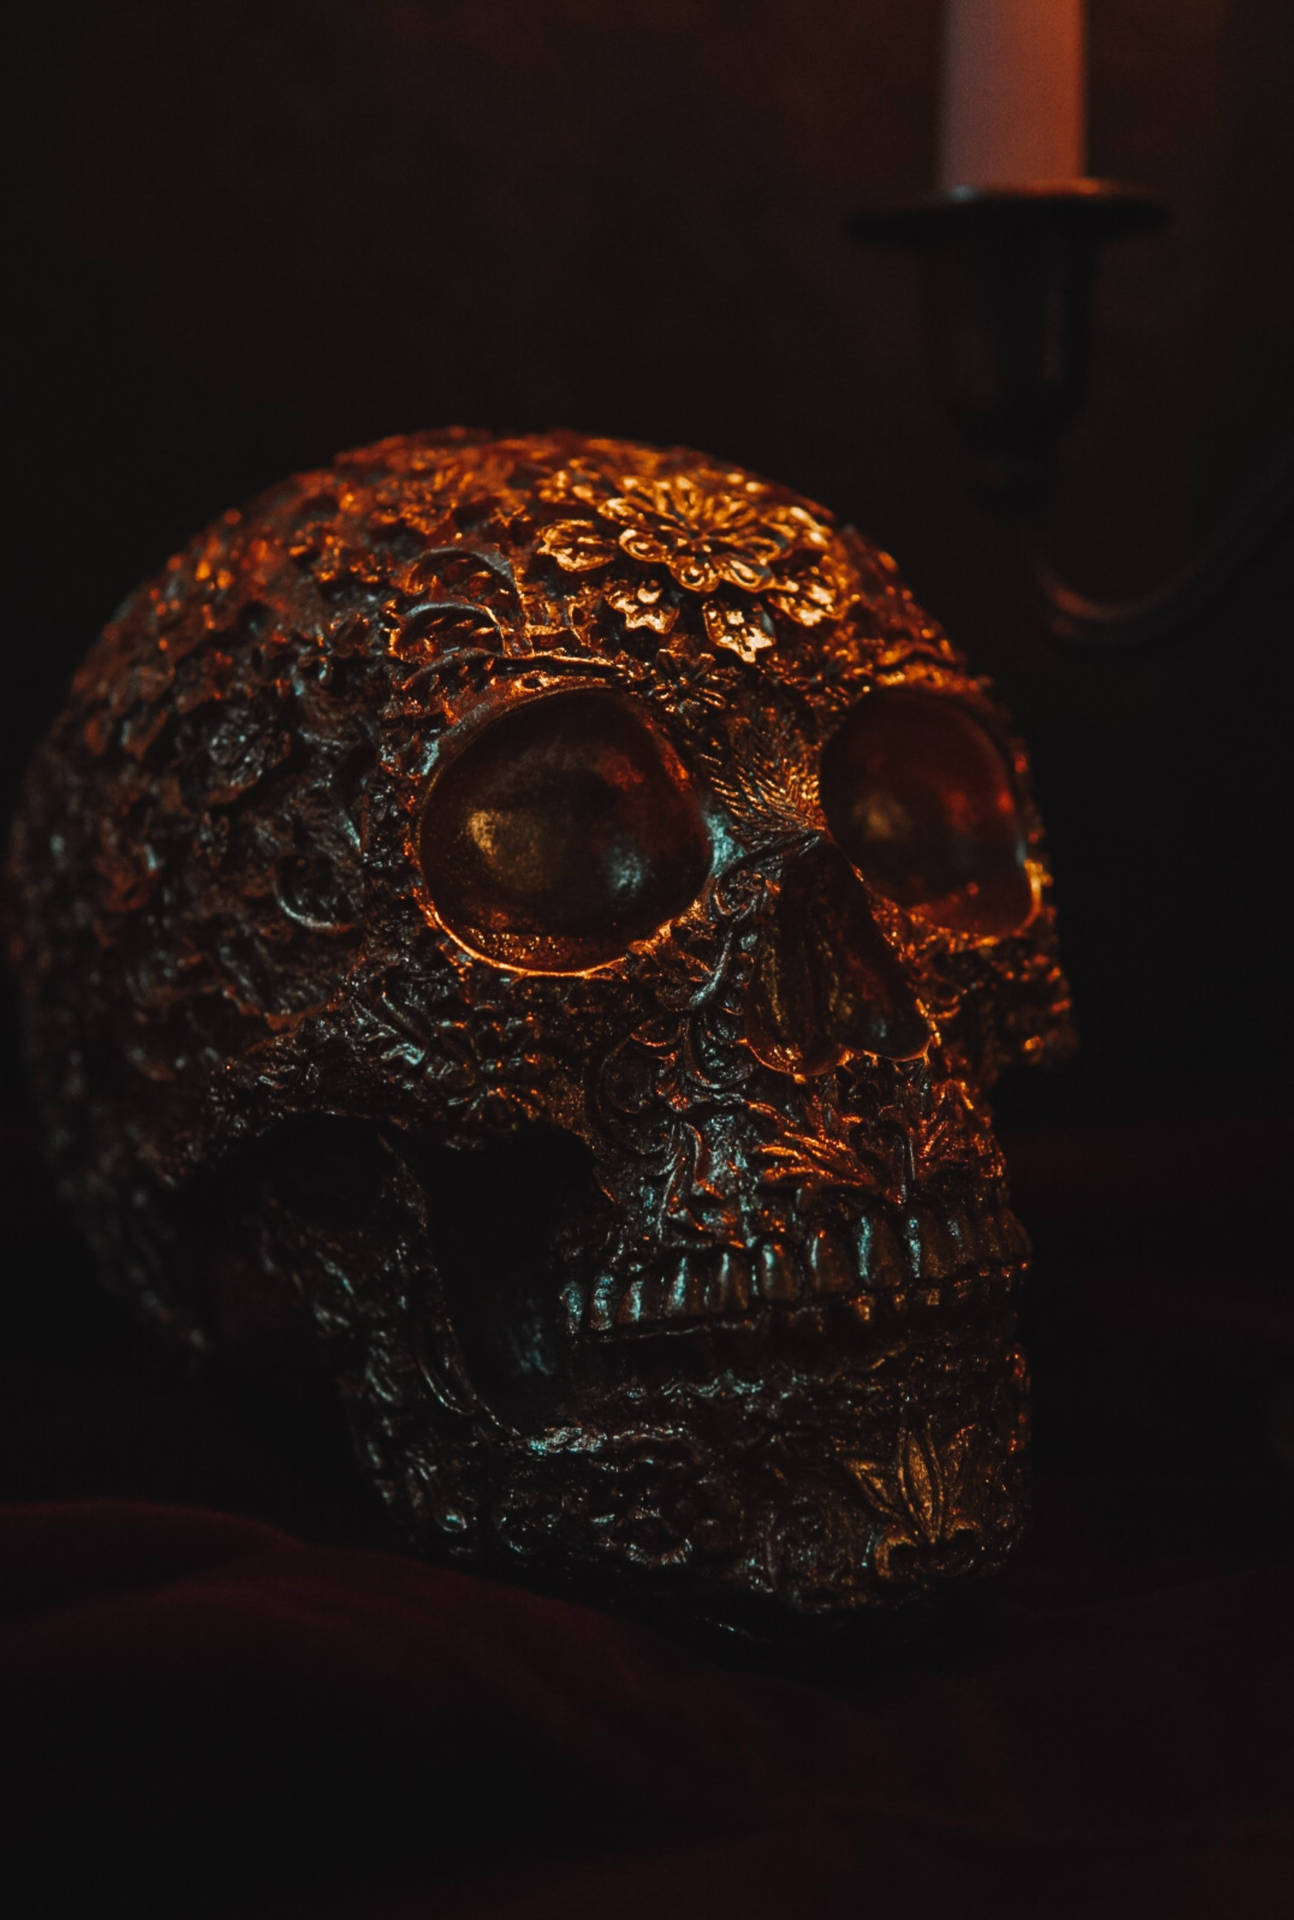 Scary Skull Floral Textured Metal Background